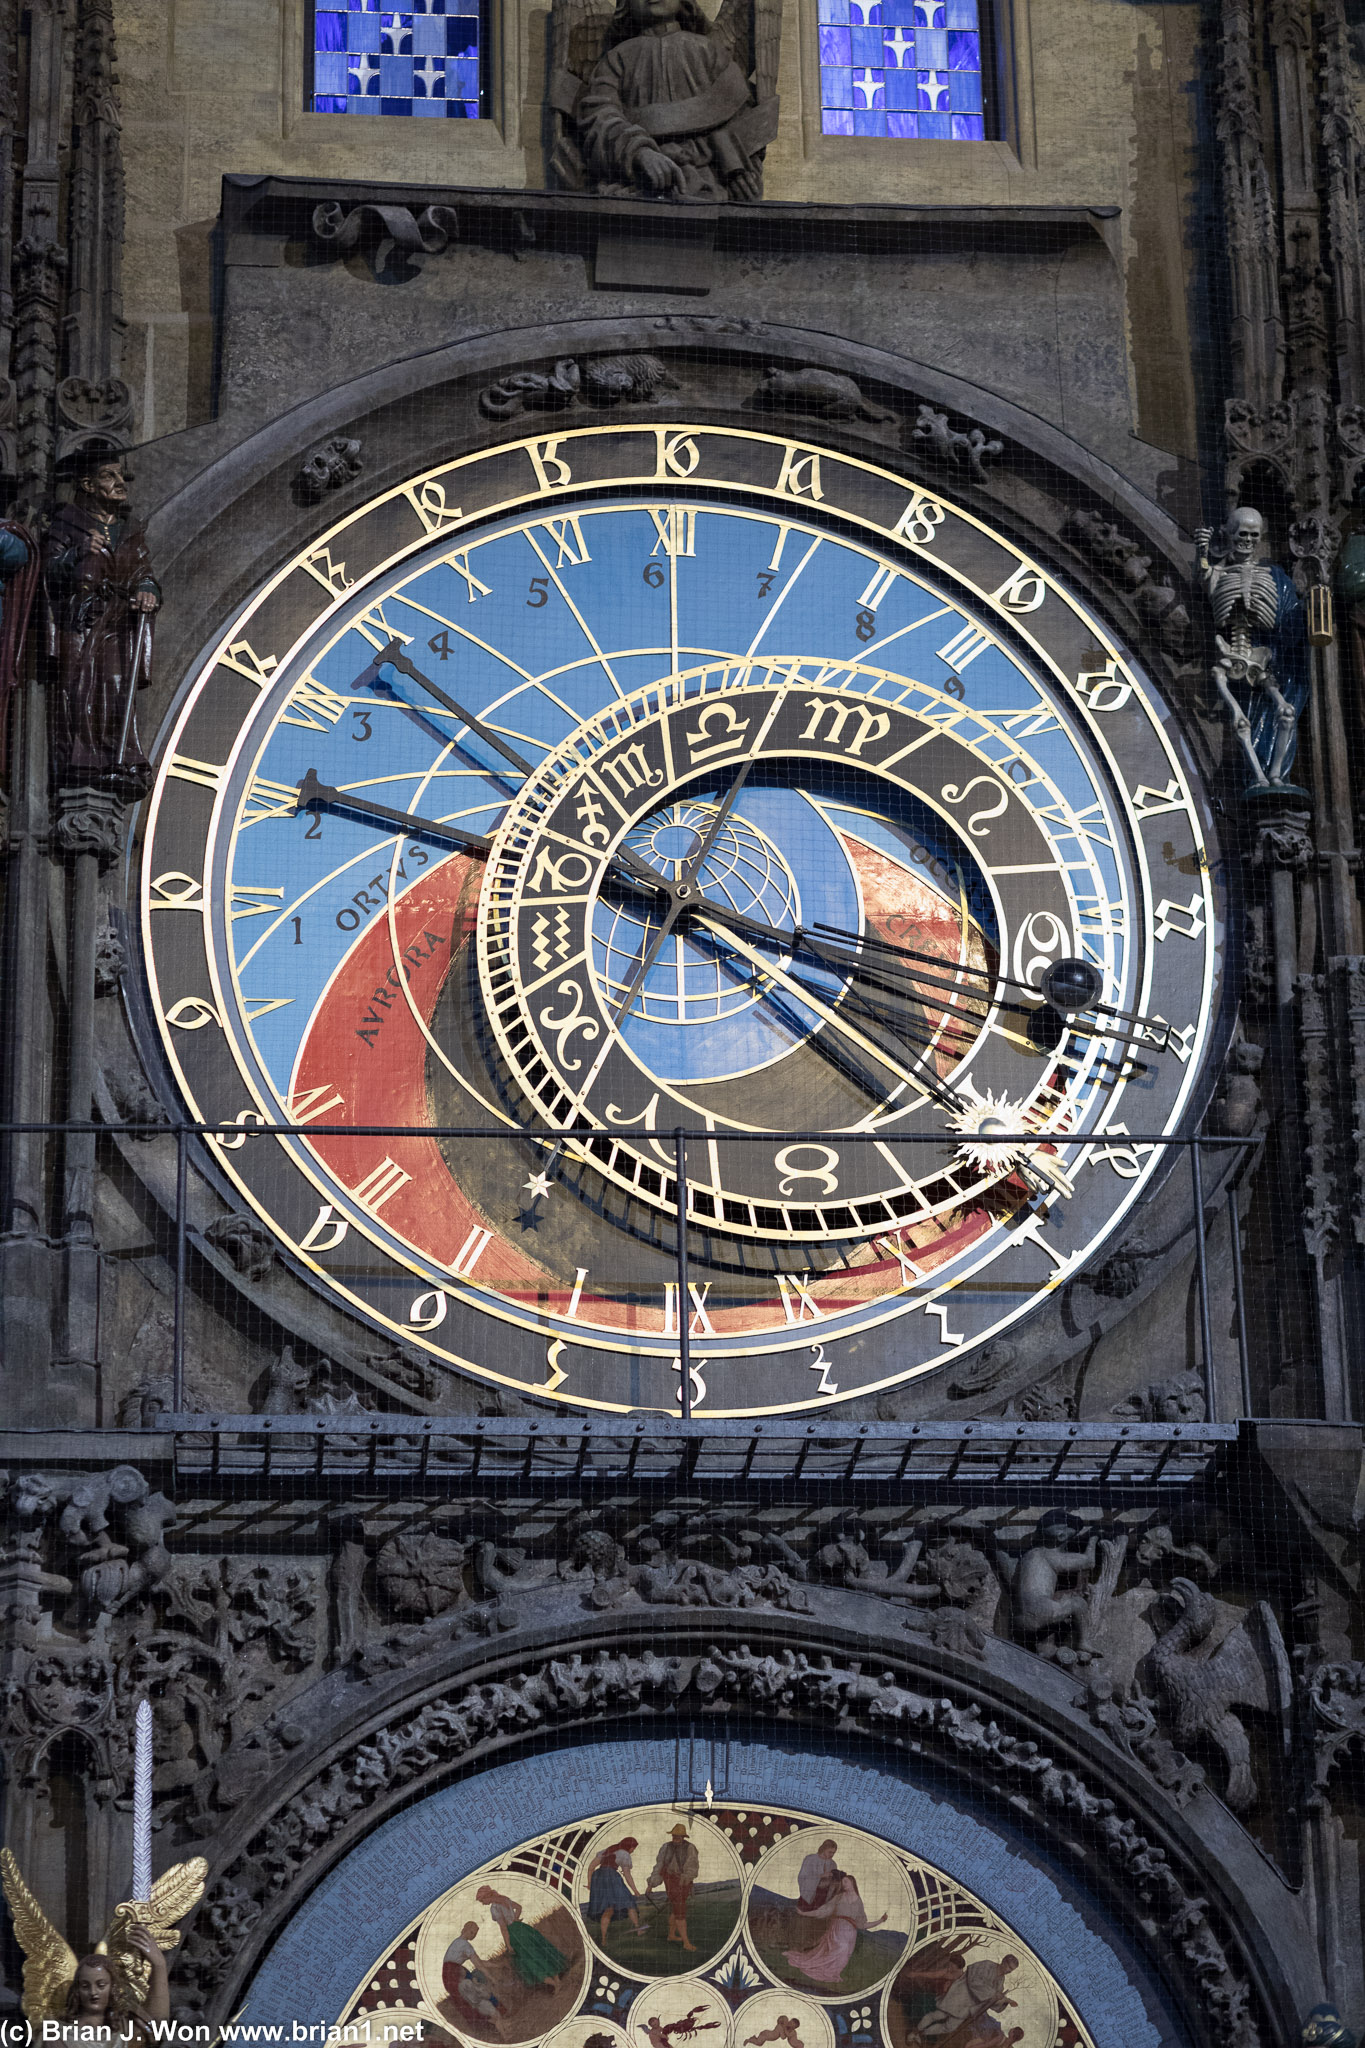 Close-up of the upper astronomical clock.